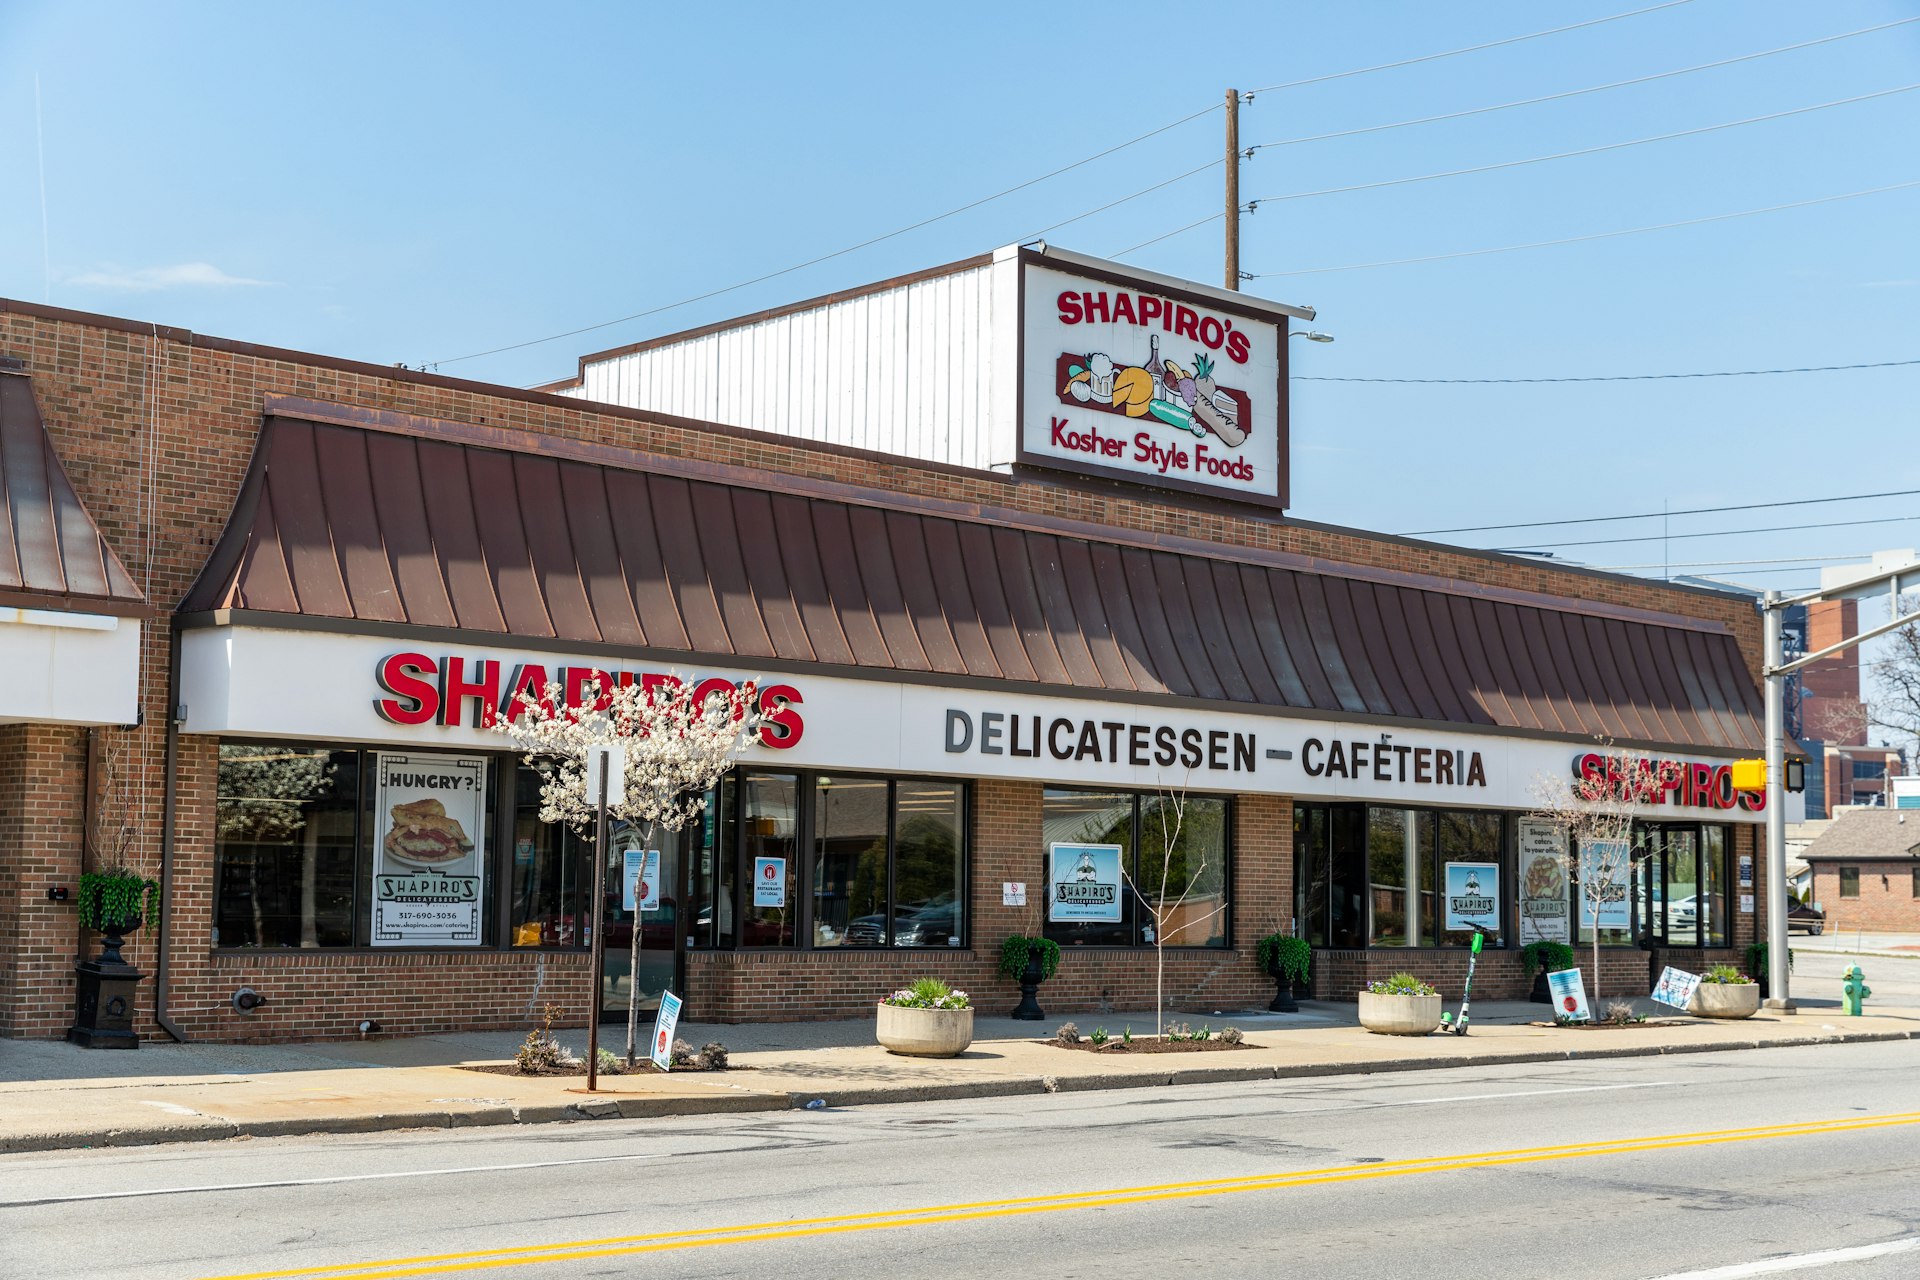 The exterior of a famous deli in Indianapolis, Shapiro's